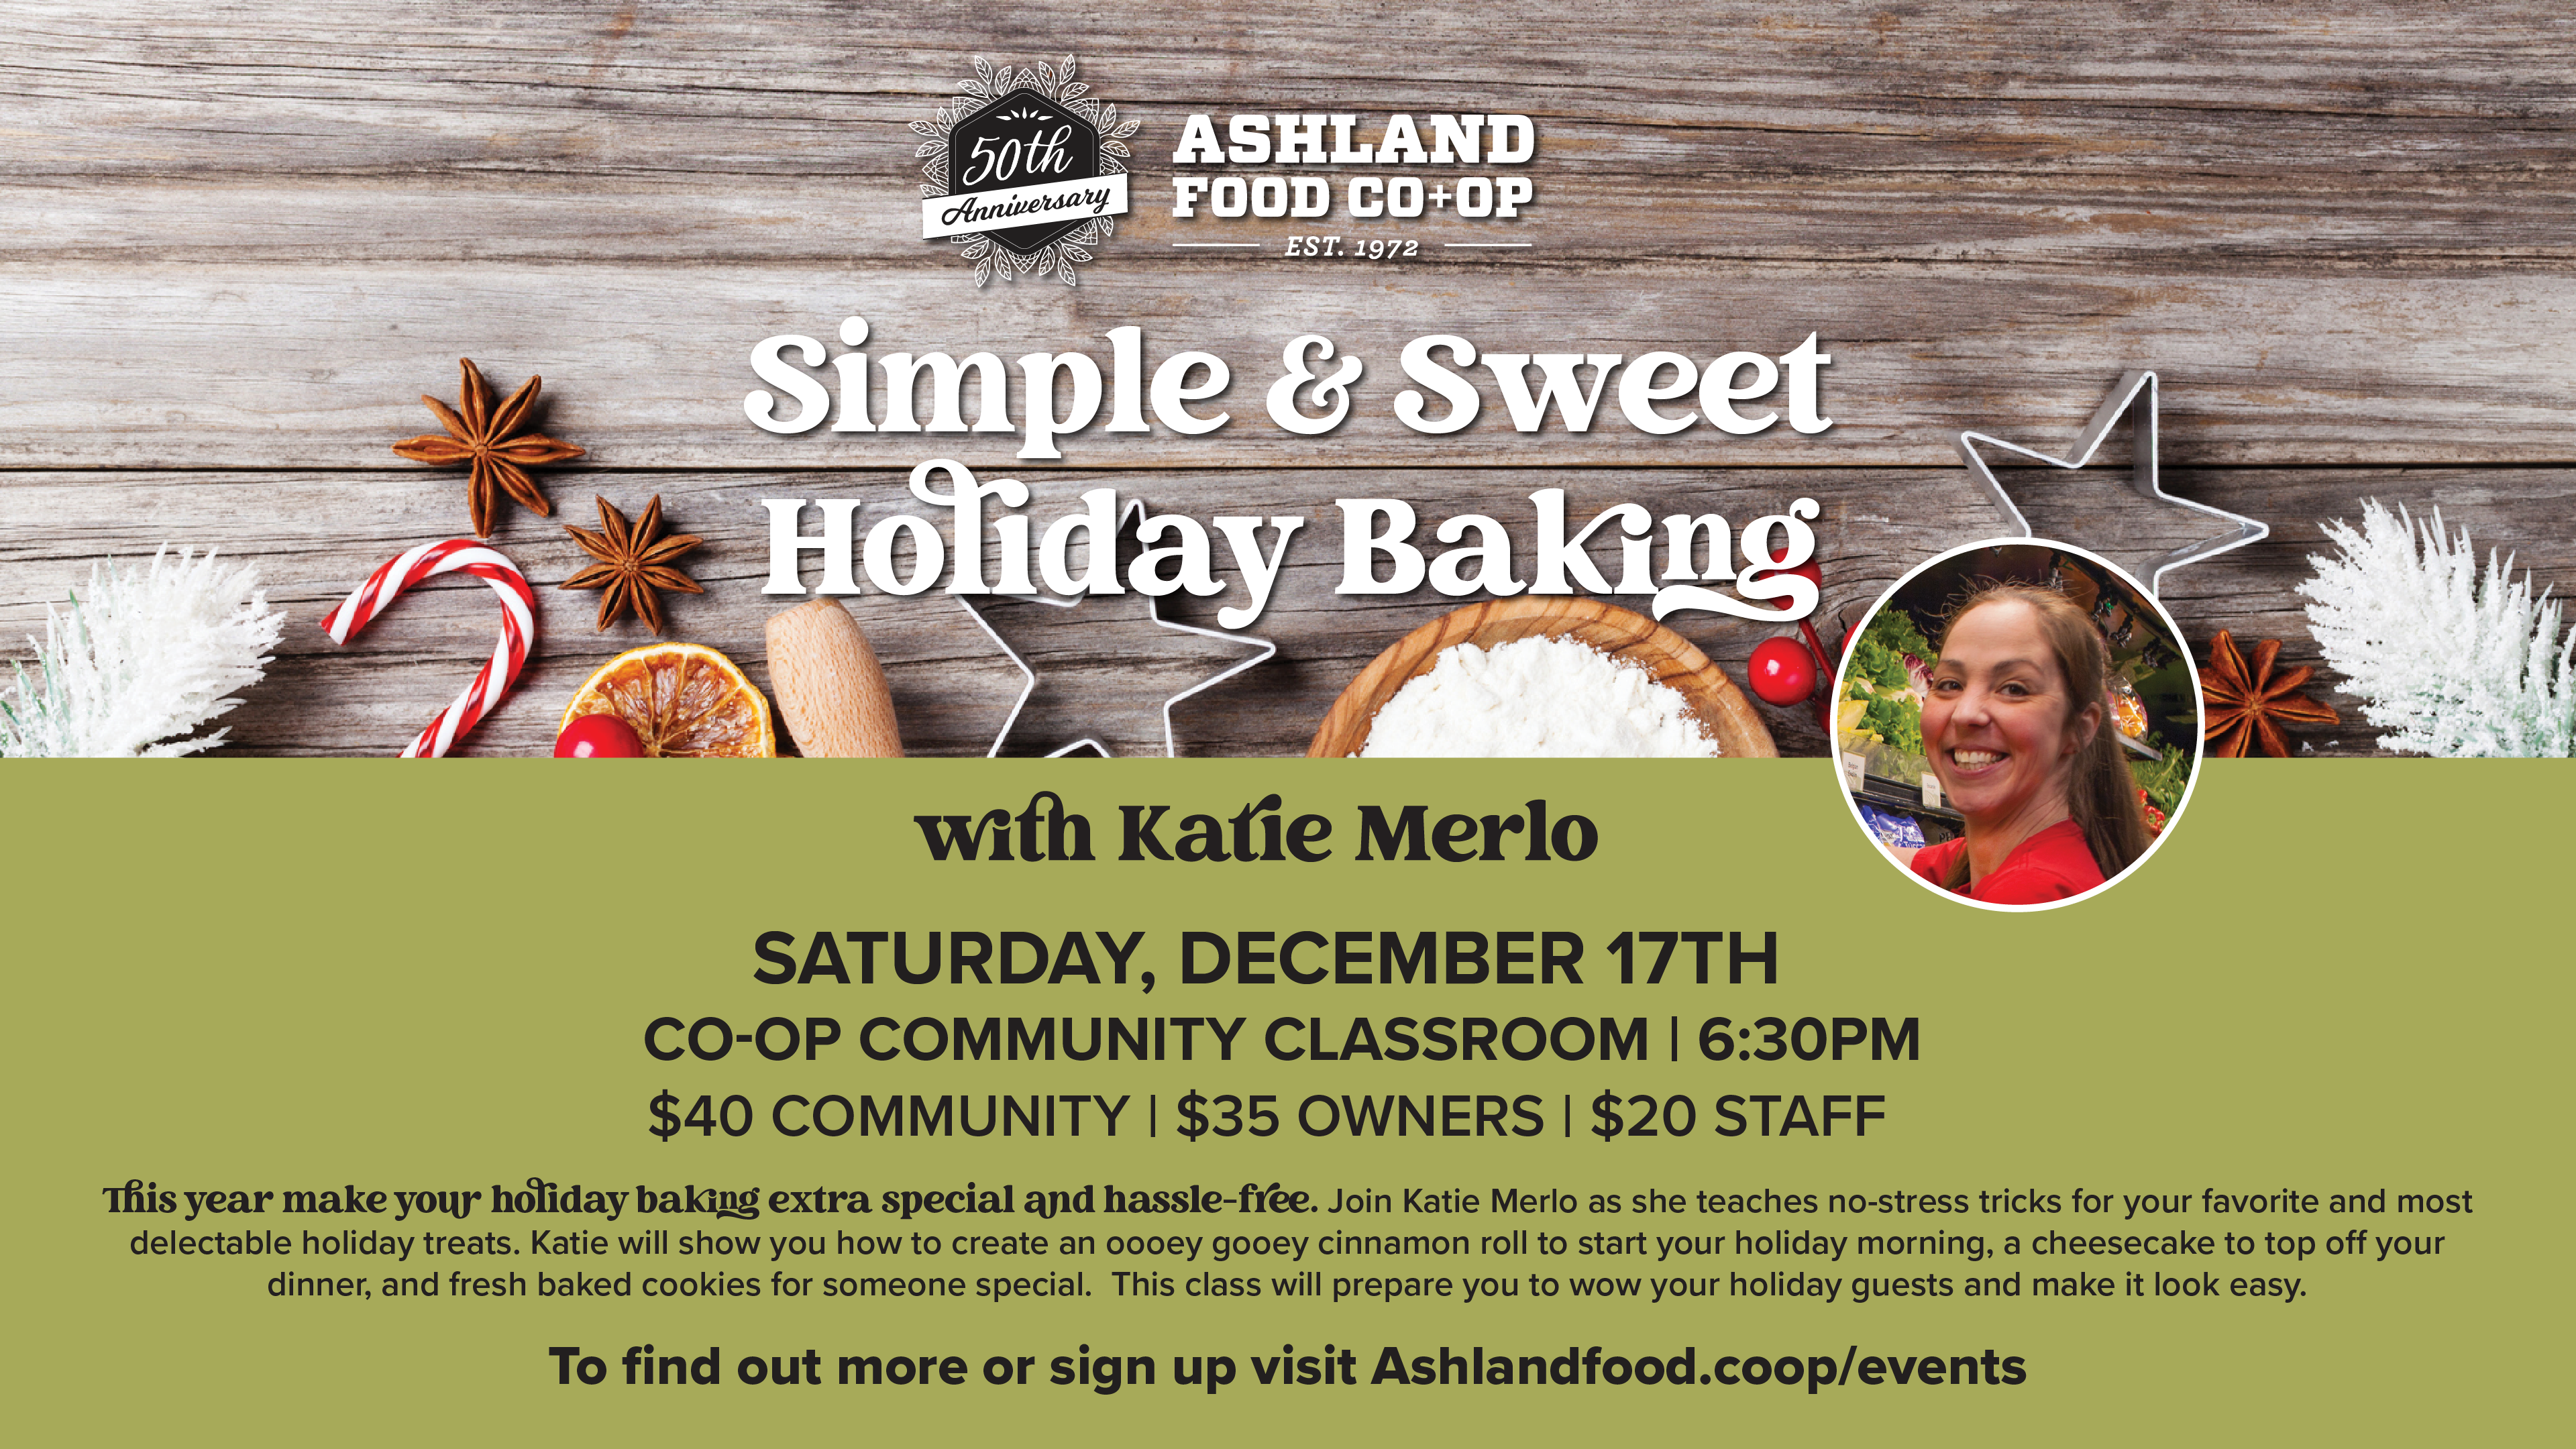 Simple and Sweet Holiday Baking Returns to the Ashland Food Co-op Community Classroom Kitchen